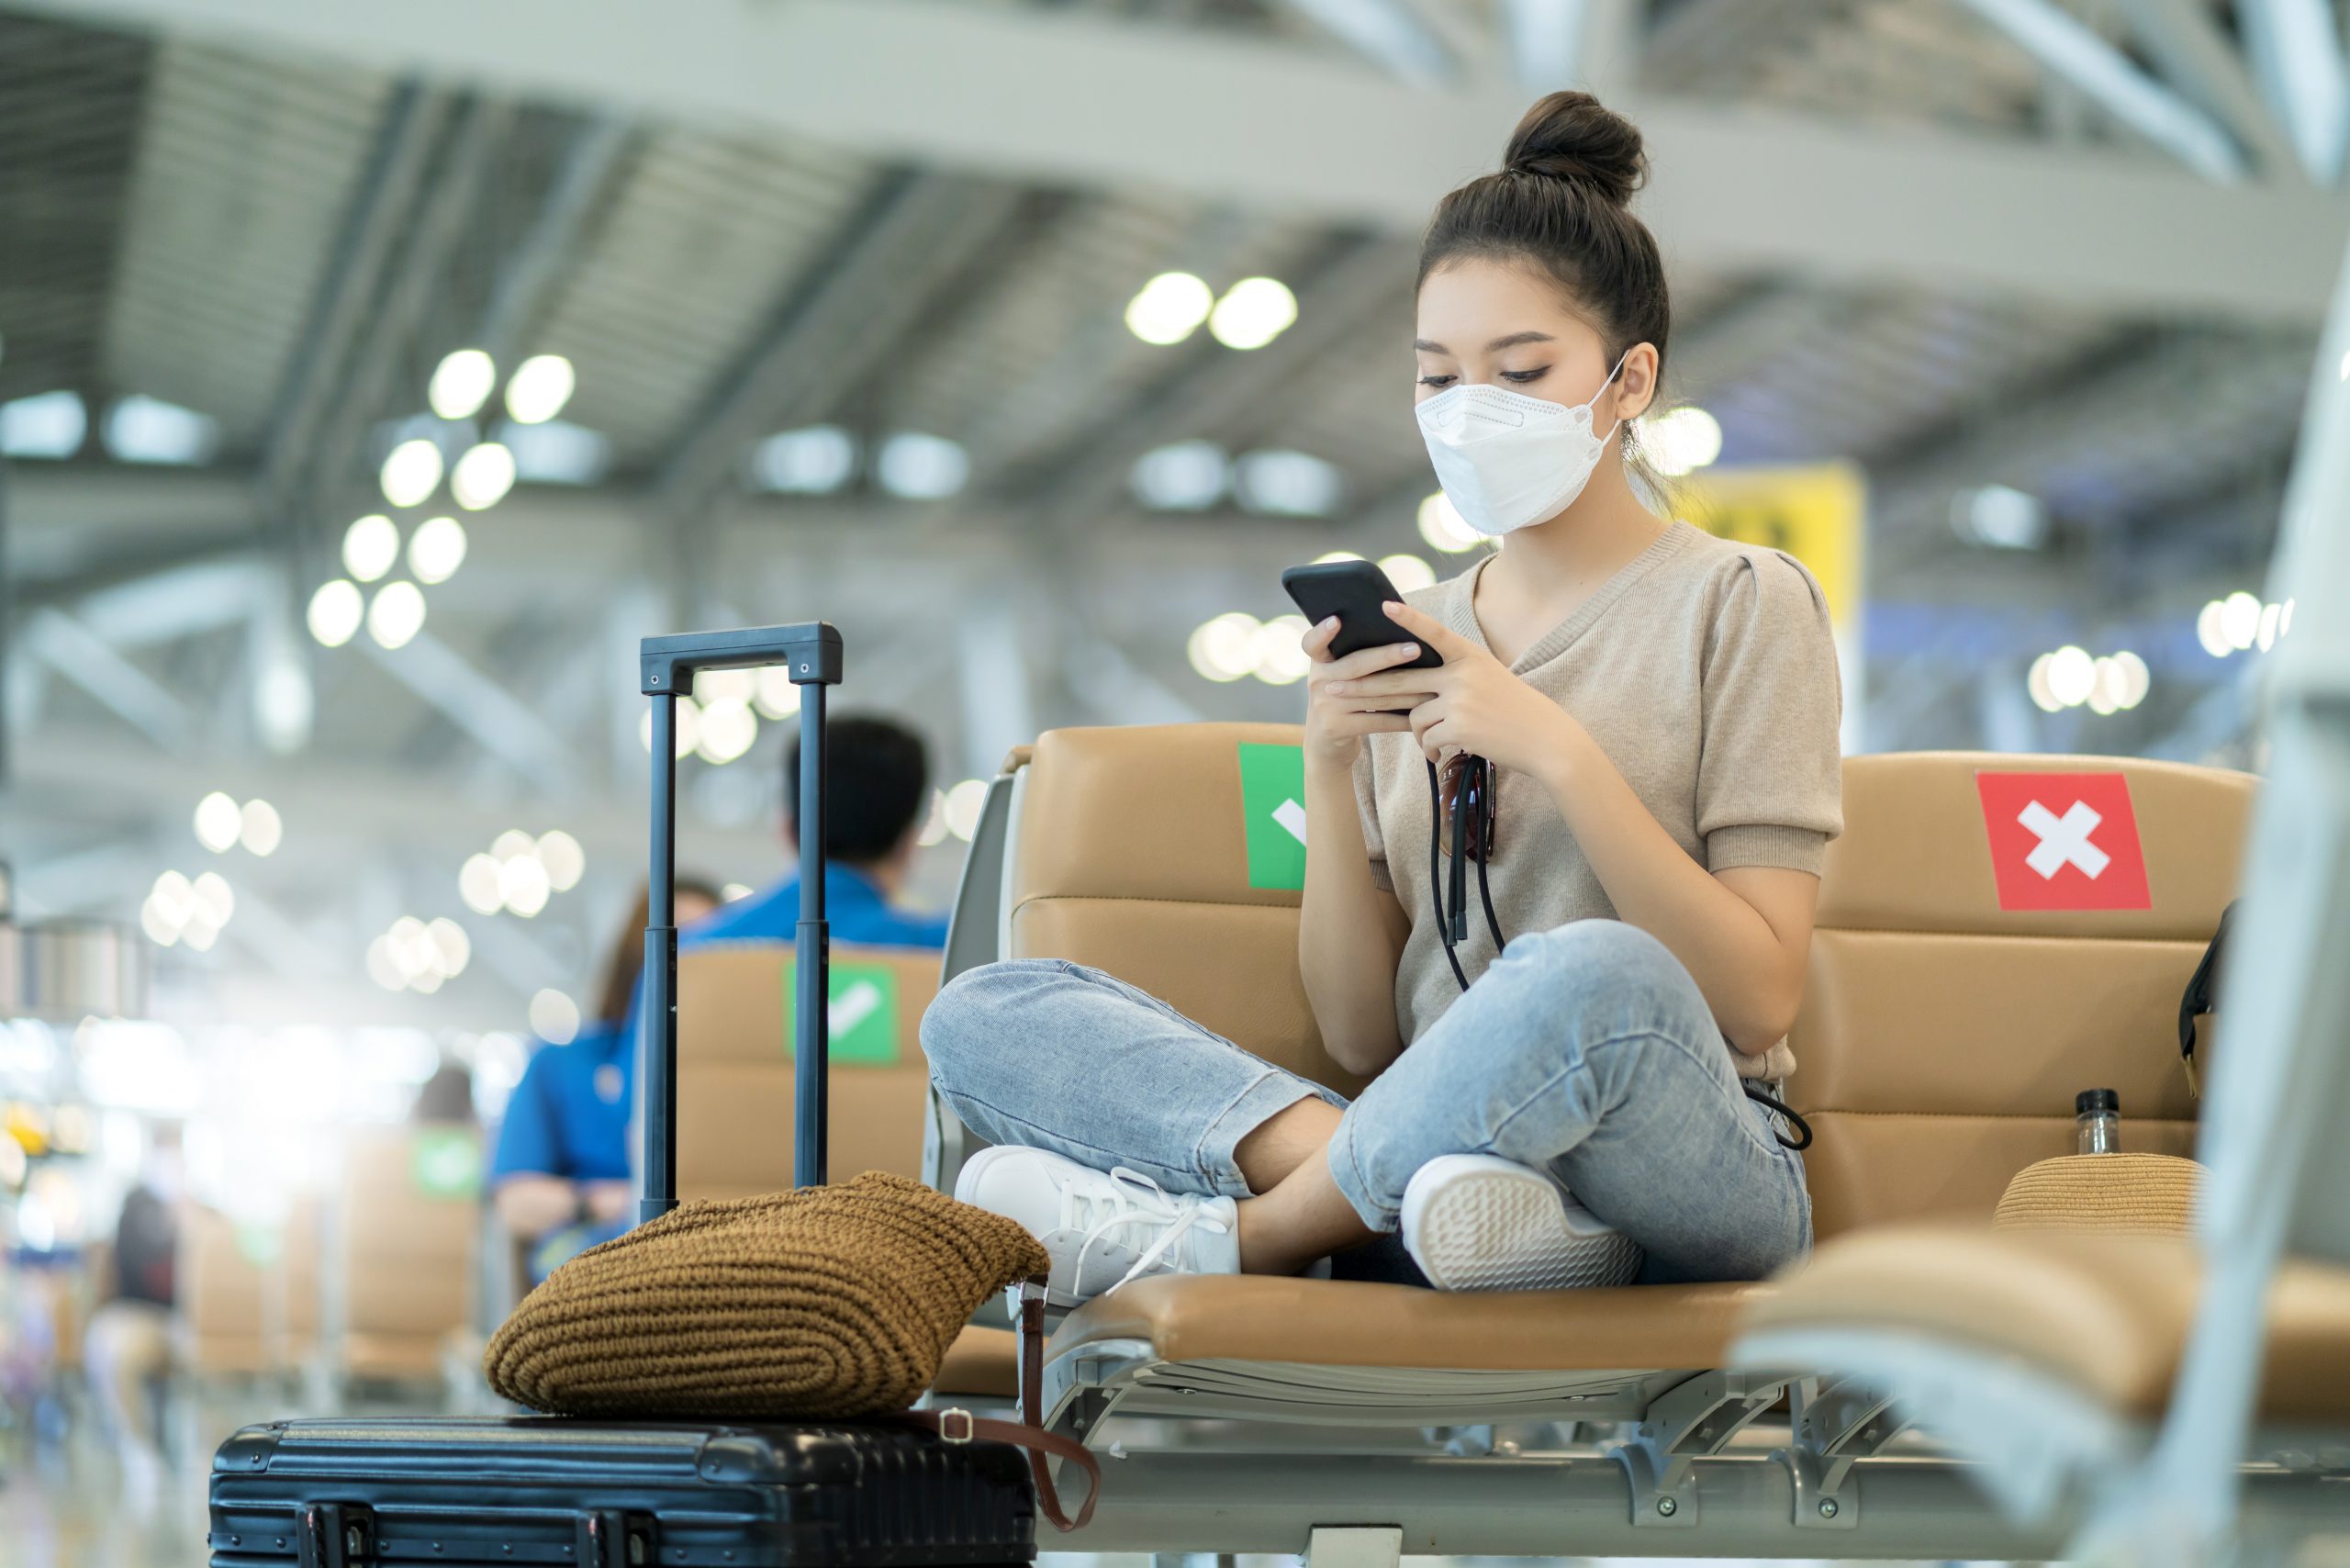 Asian woman using her phone at the airport.